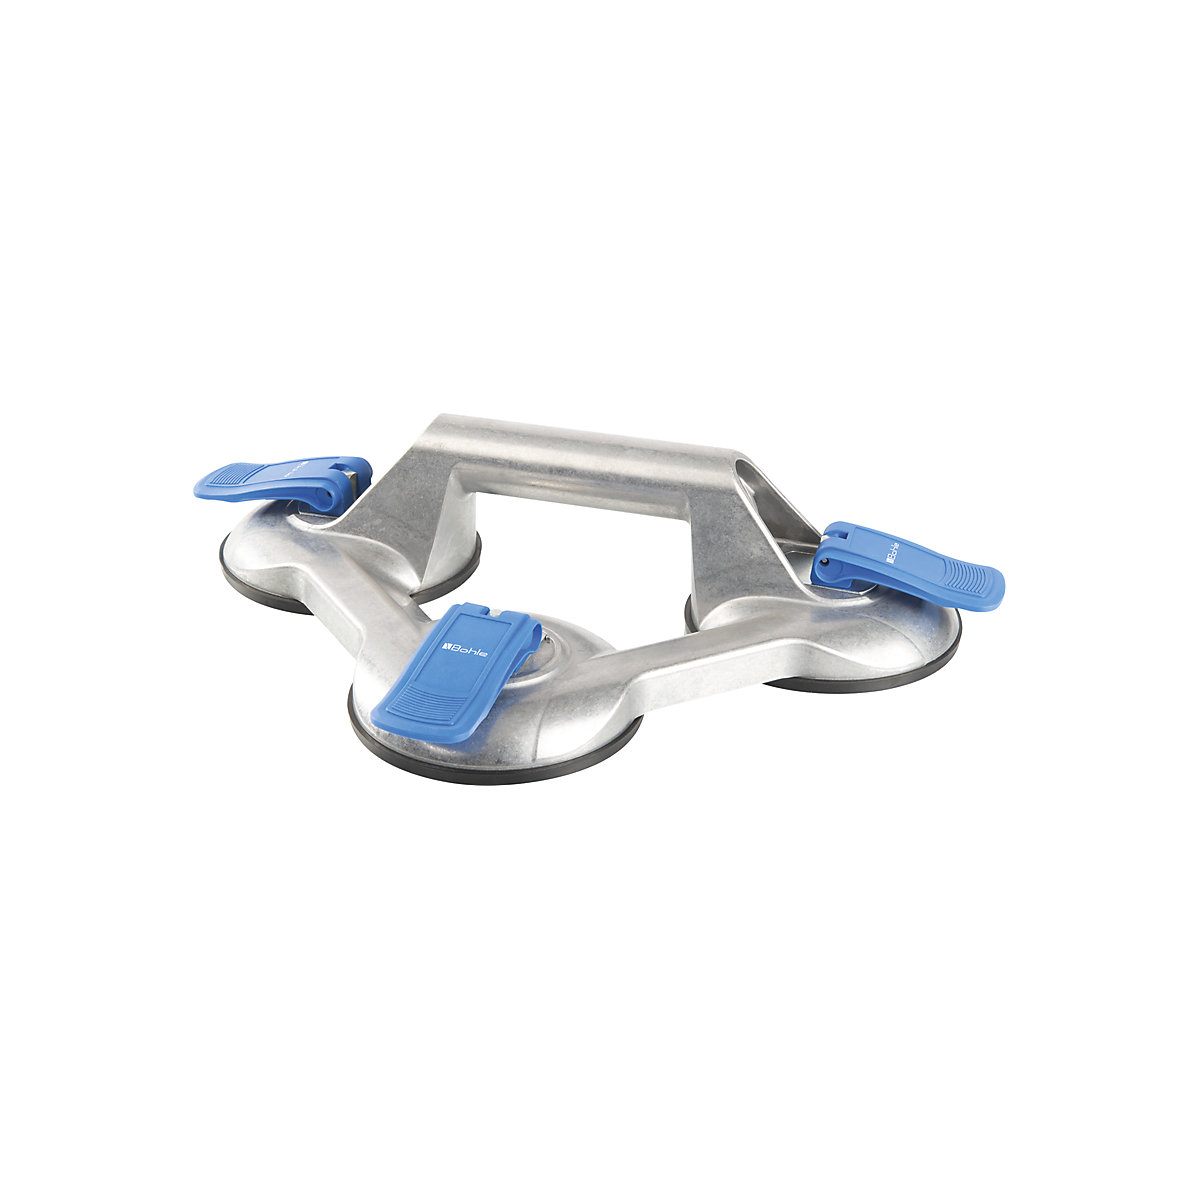 VERIBOR® suction lifter - Bohle